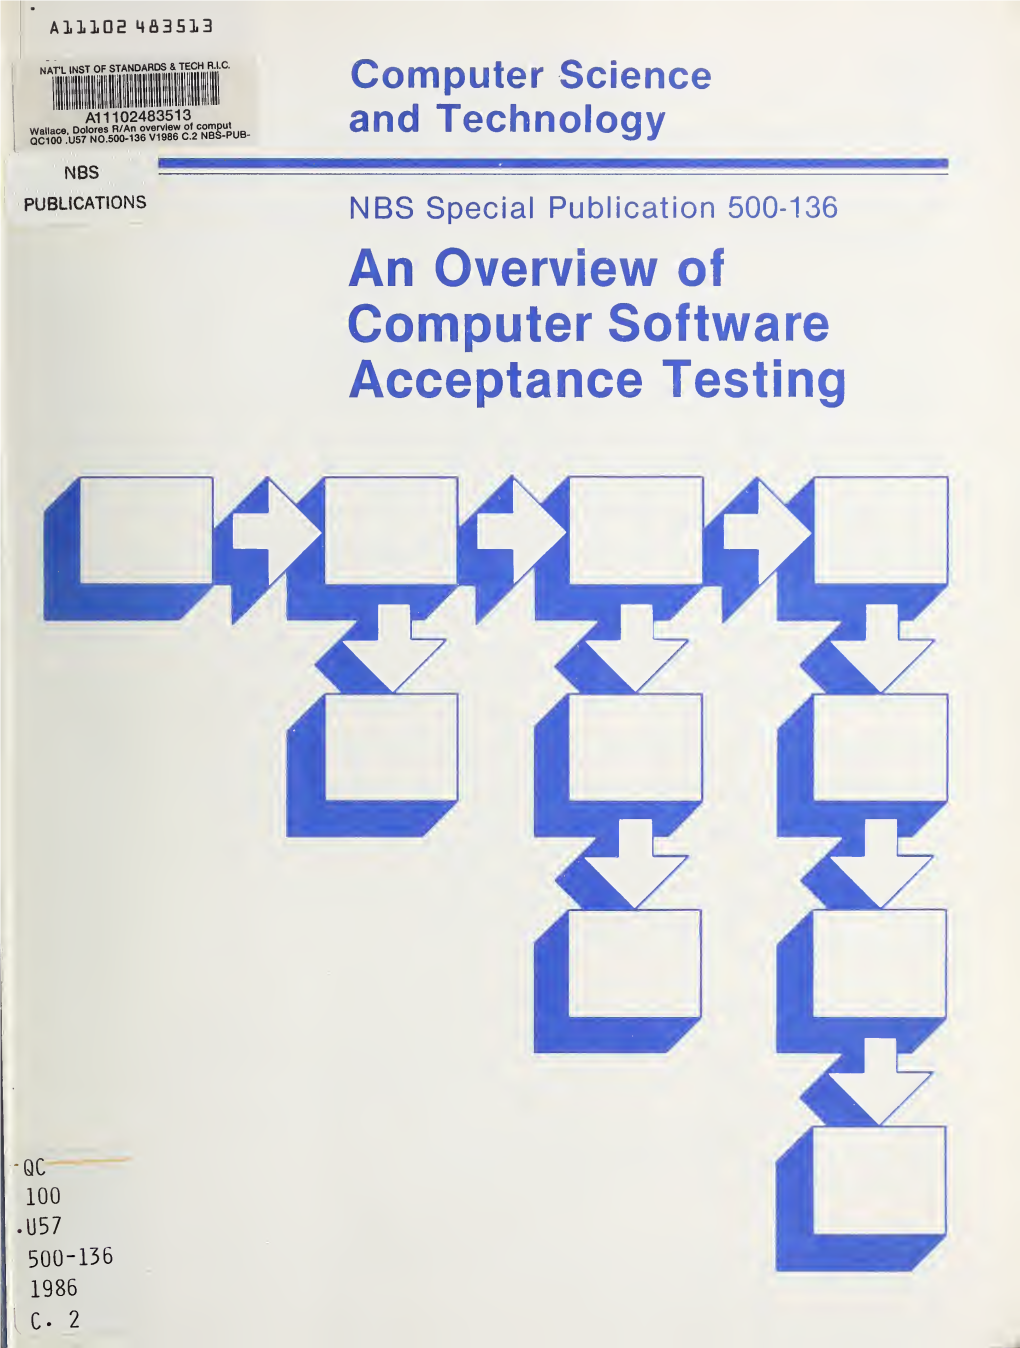 An Overview of Computer Software Acceptance Testing